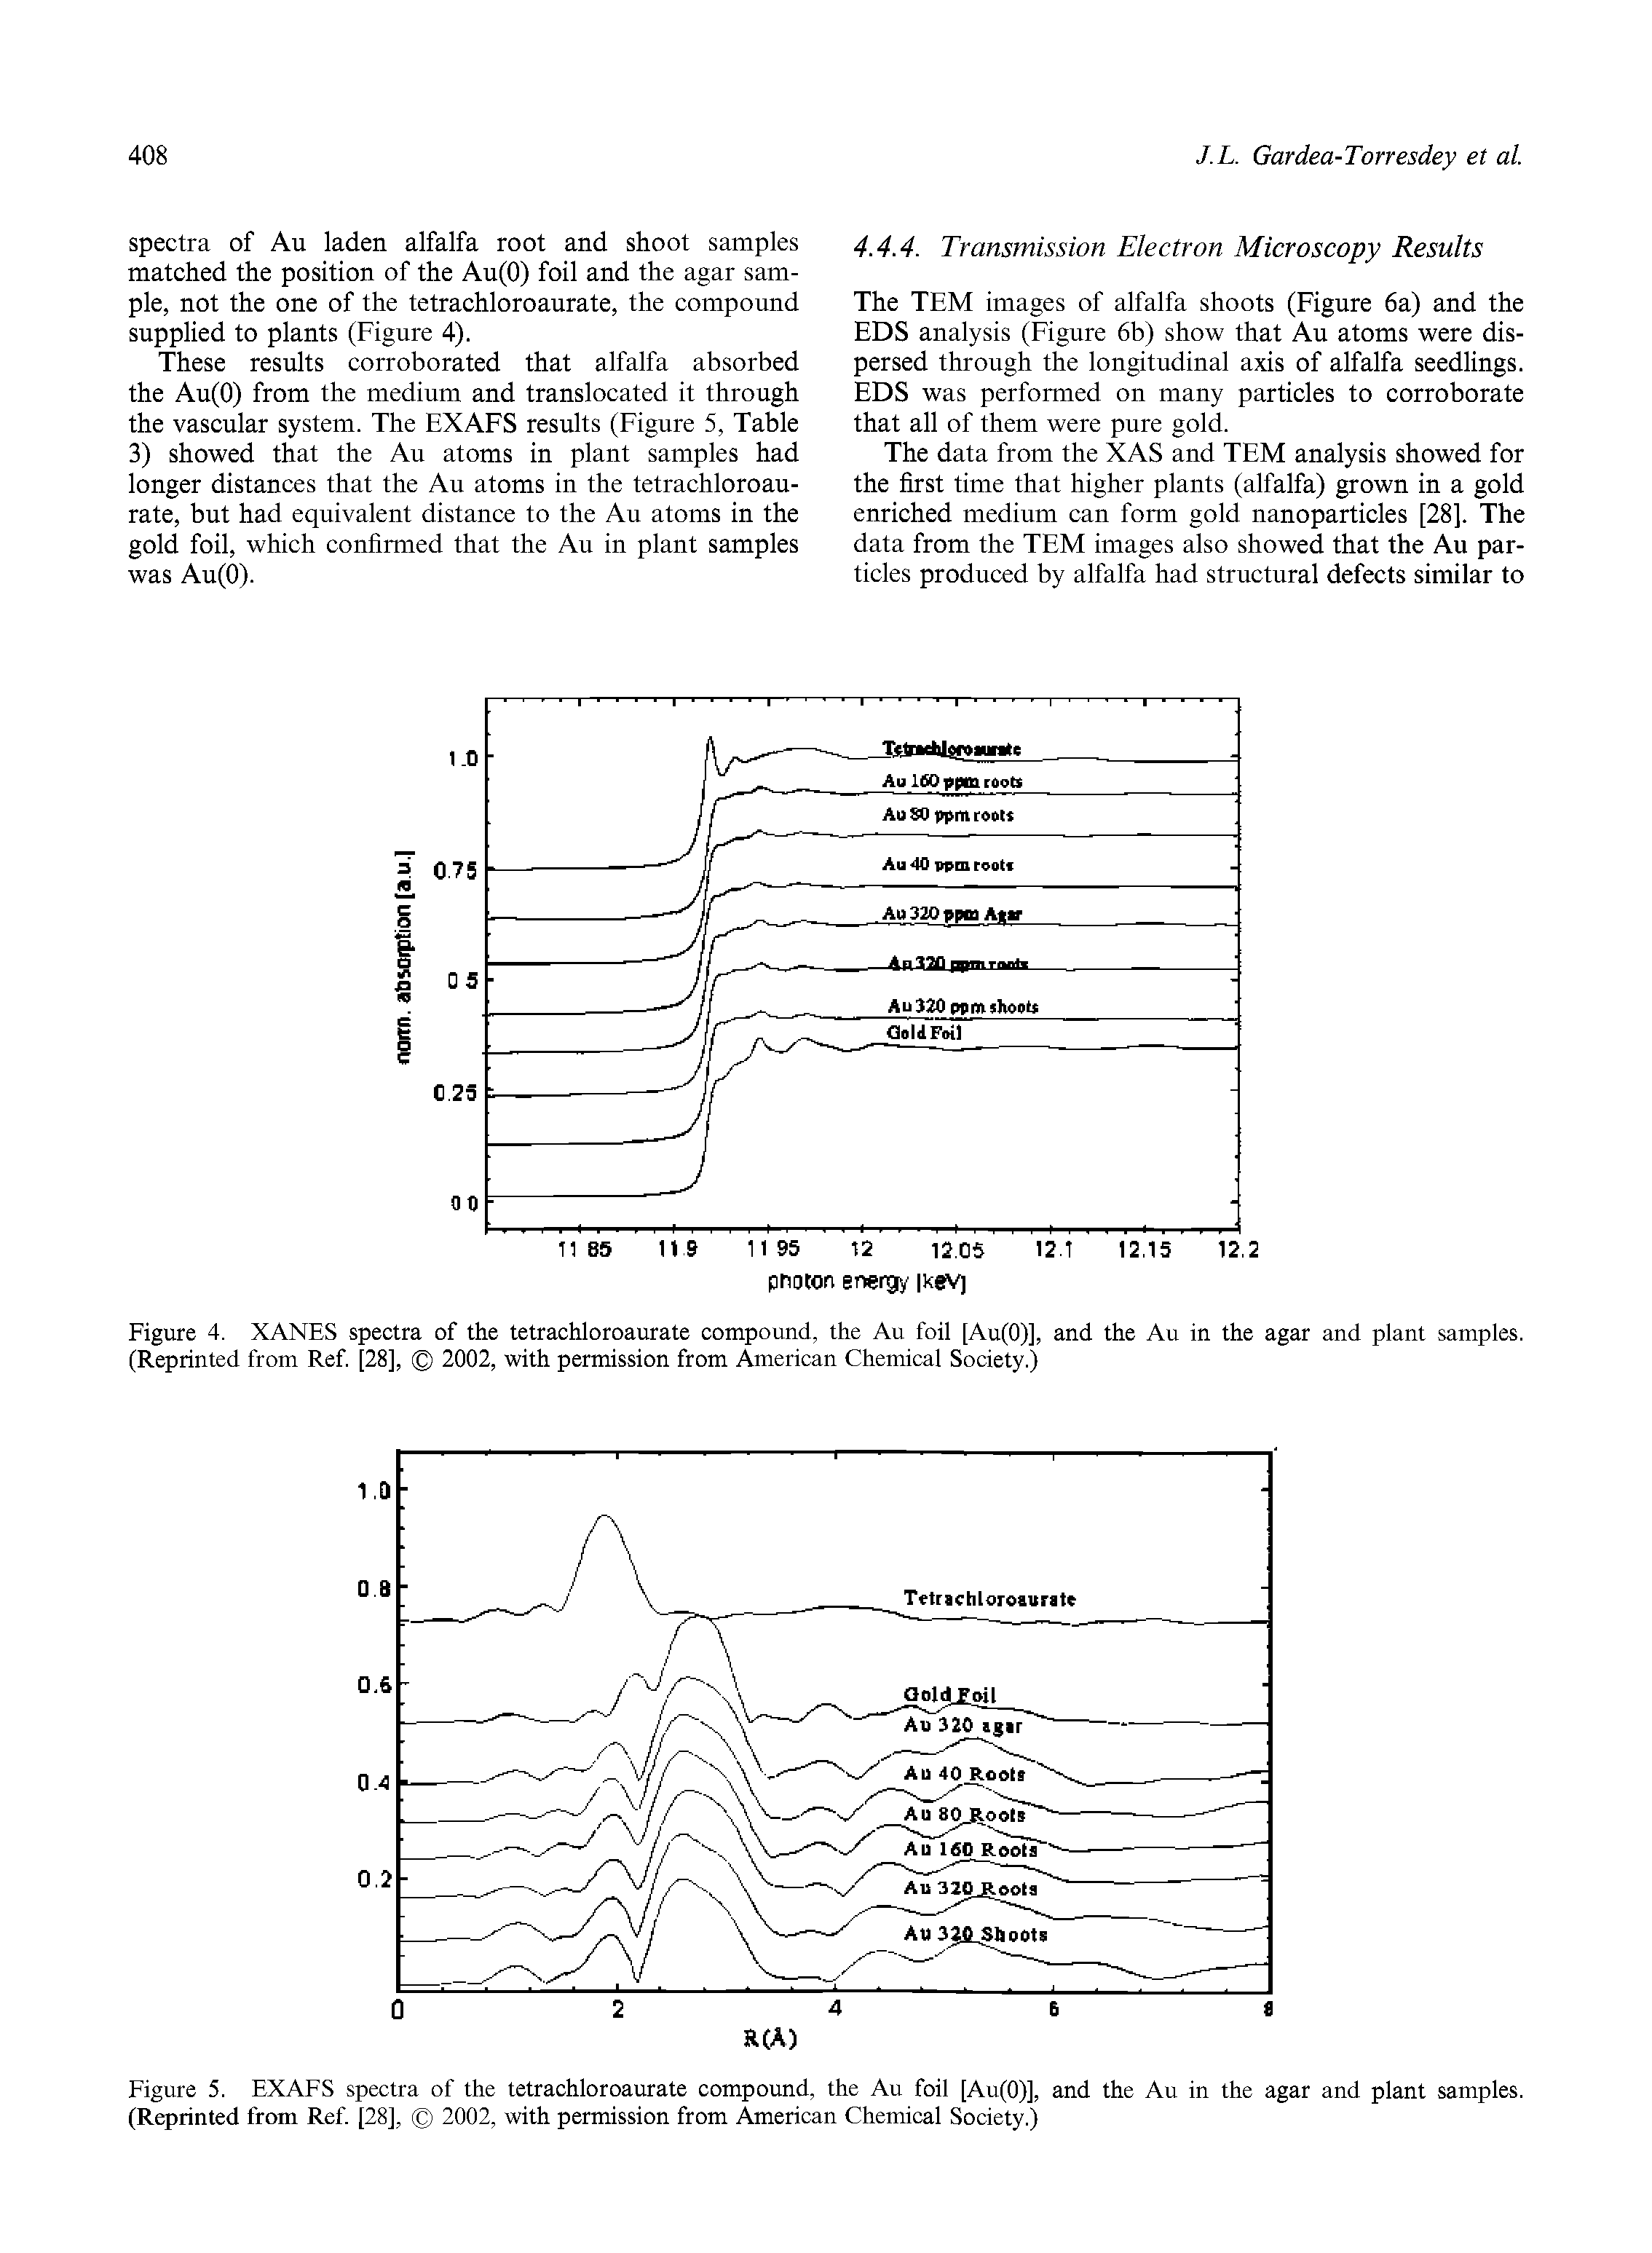 Figure 4. XANES spectra of the tetrachloroaurate compound, the Au foil [Au(0)], and the Au in the agar and plant samples. (Reprinted from Ref. [28], 2002, with permission from American Chemical Society.)...